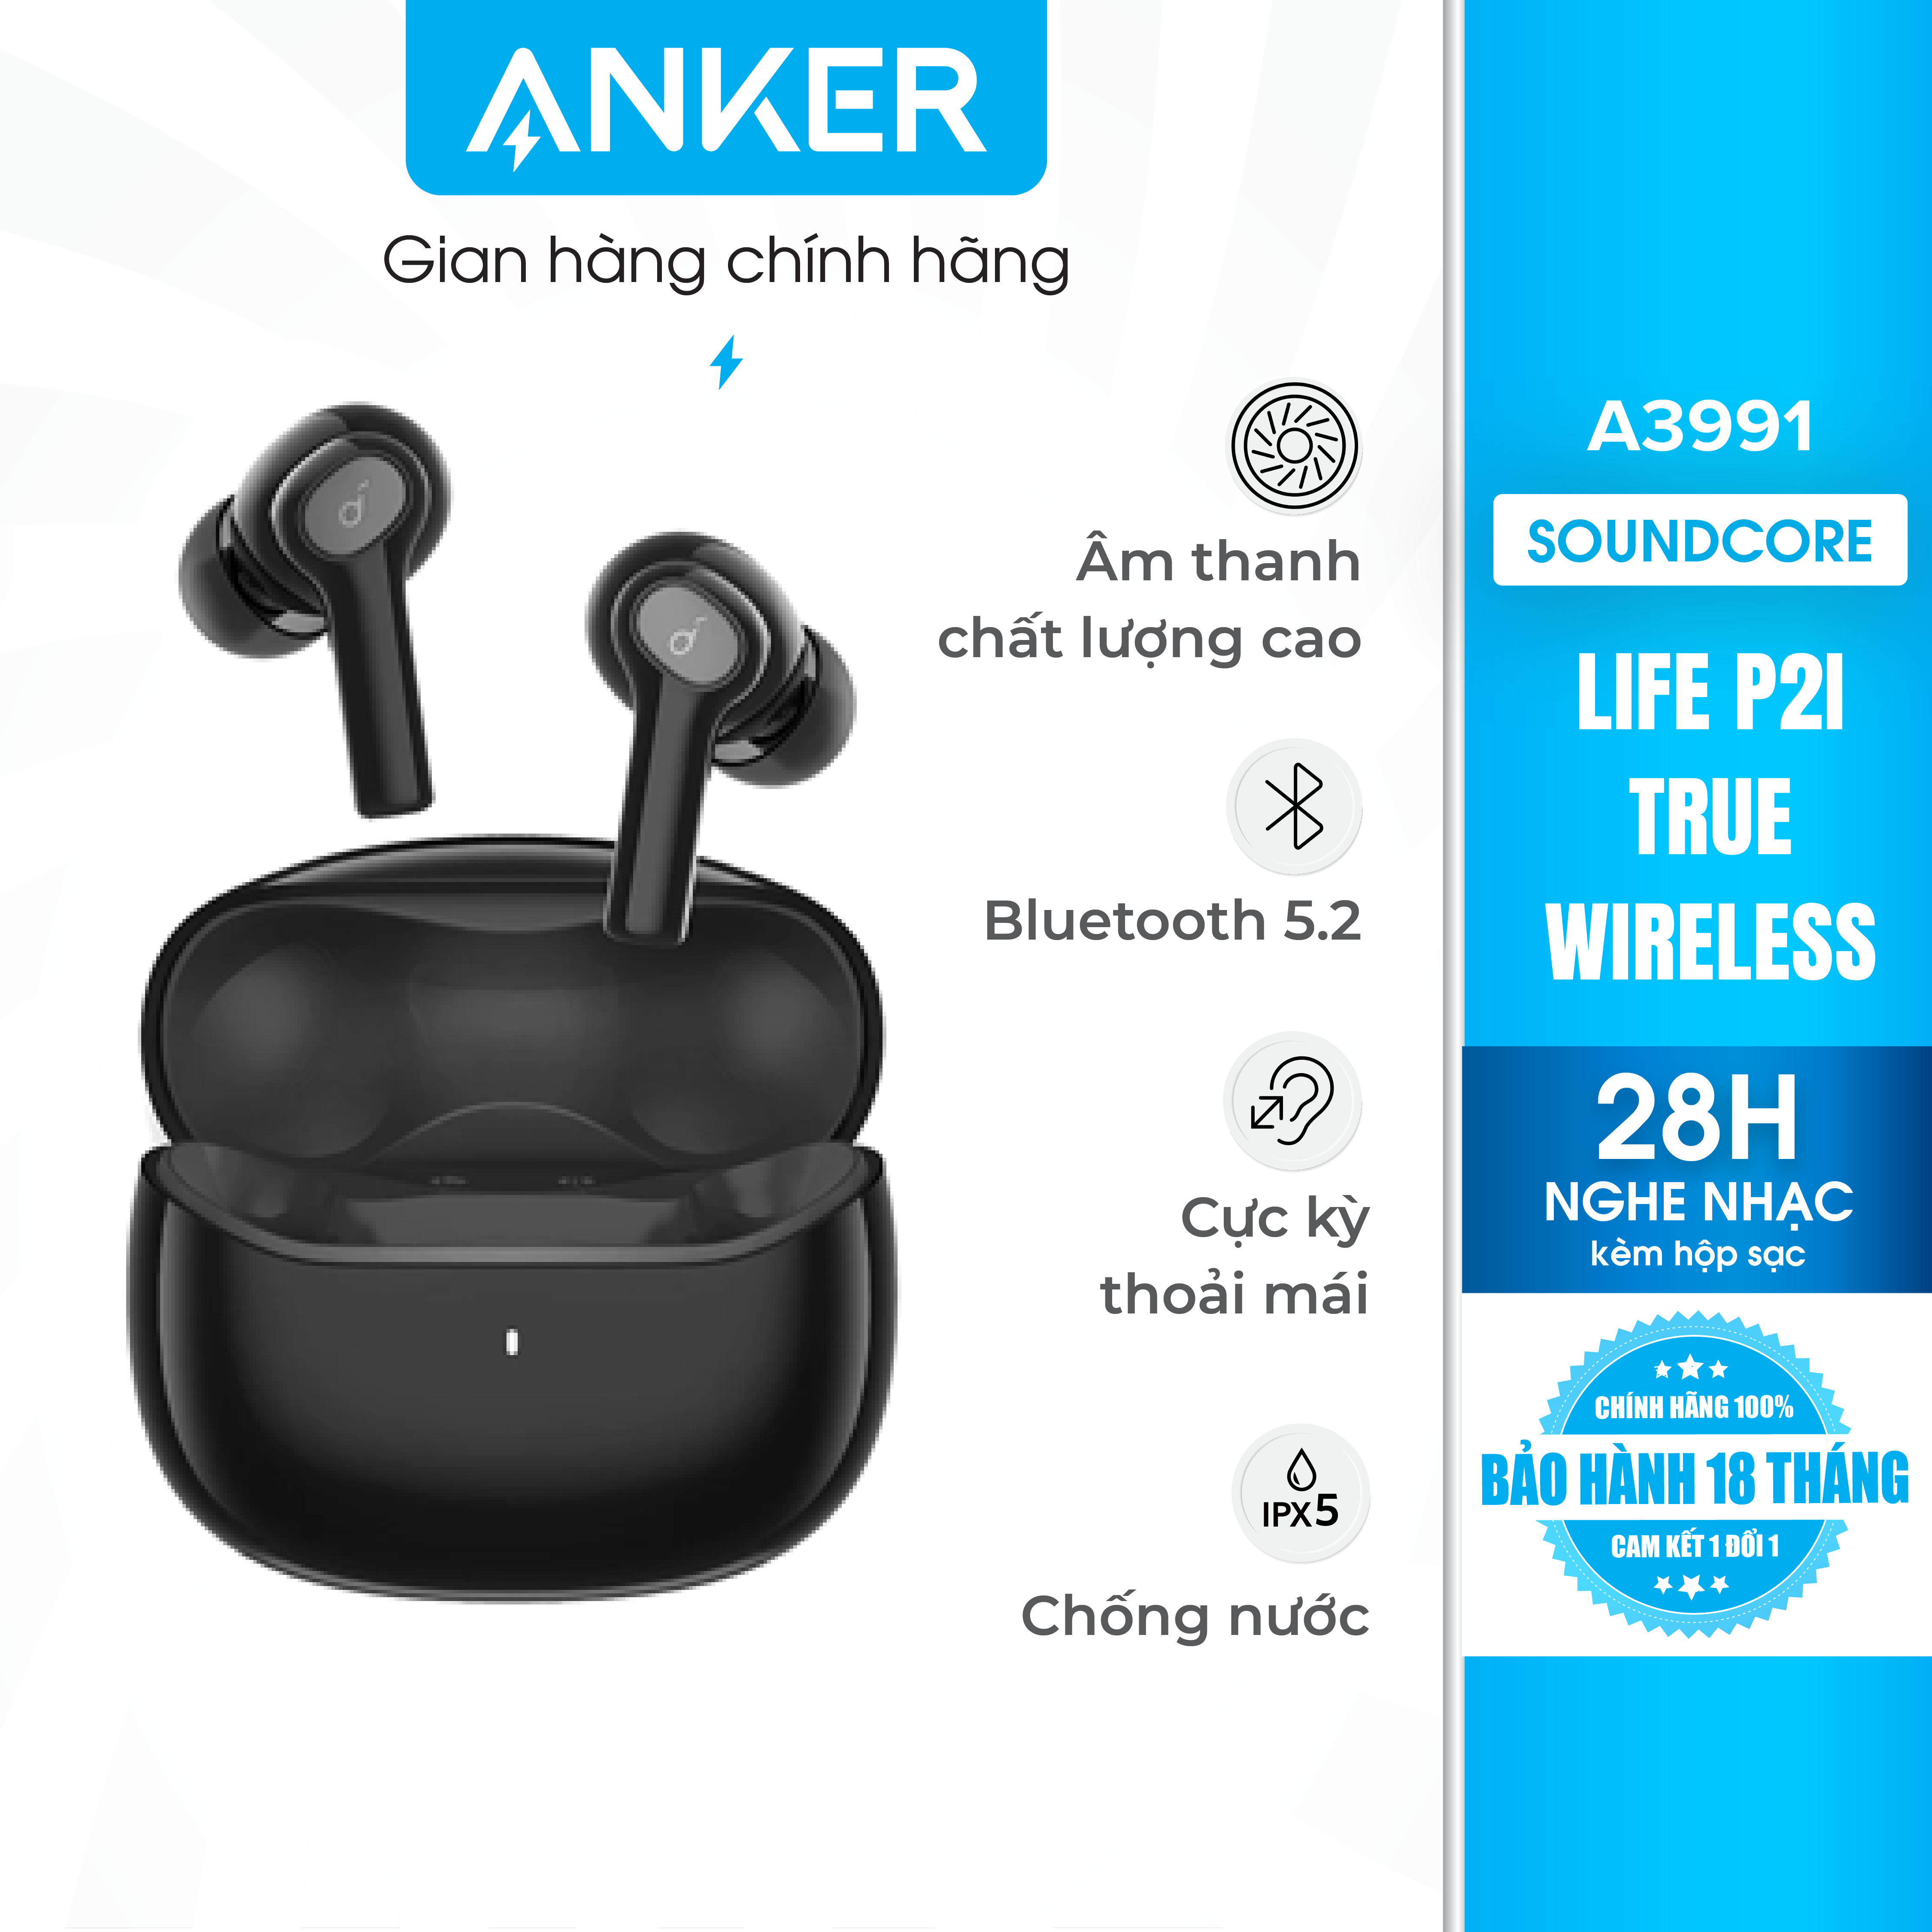 Wireless headset soundcore (by Anker) life P2i true wireless (TWS), 28 hours use, water resistance IPX5, built-in 2 Micro, fast charging 10 minutes take 1 hour, Bluetooth 5.2 newest quick connect with phone-A3991